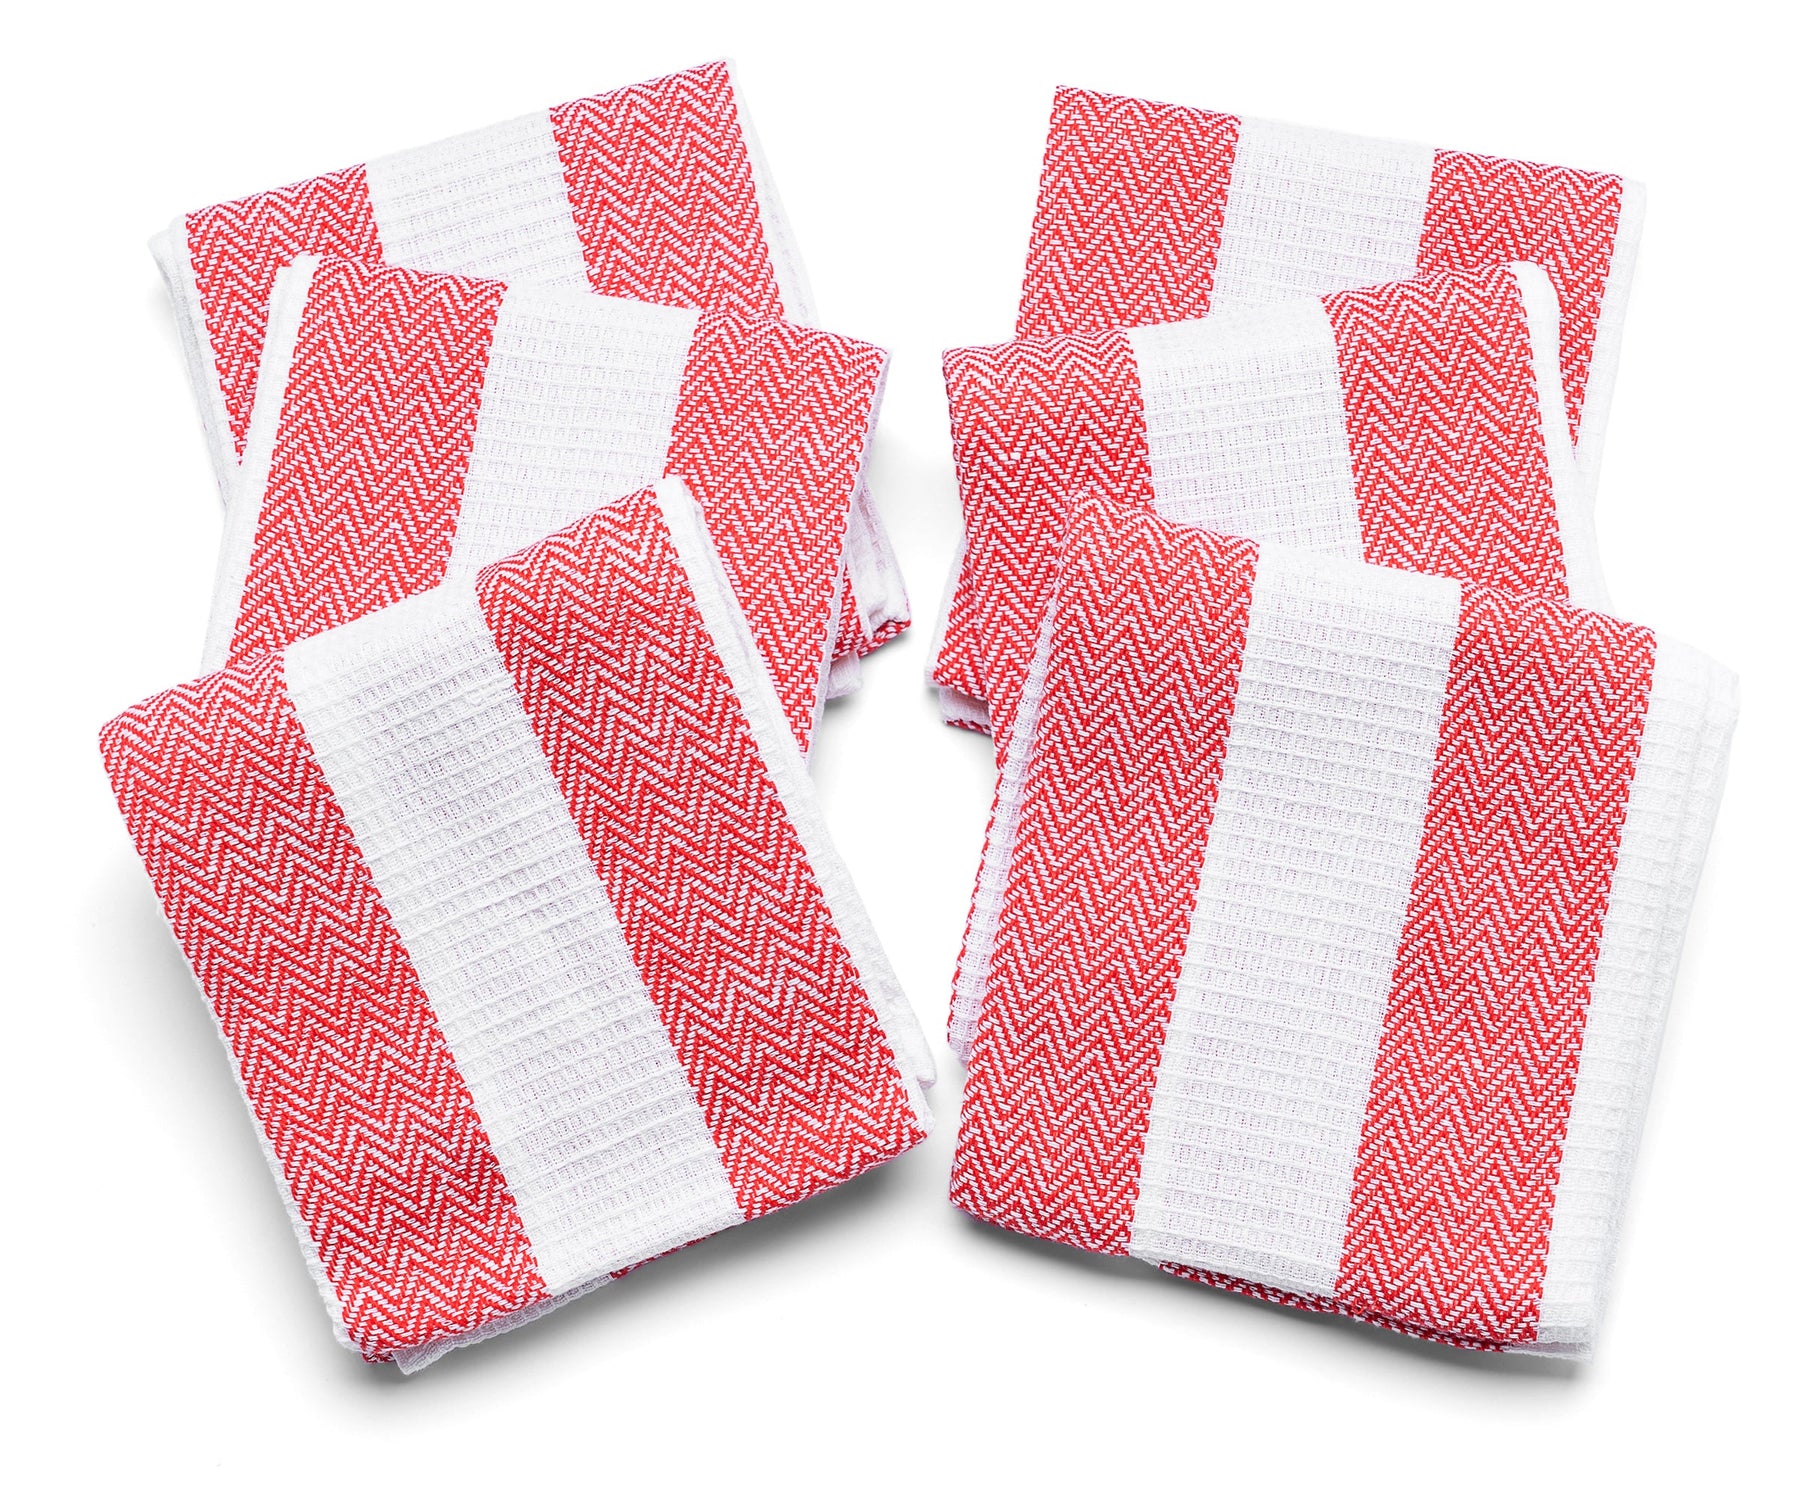 Dish towels, durable and stylish for kitchen tasks.